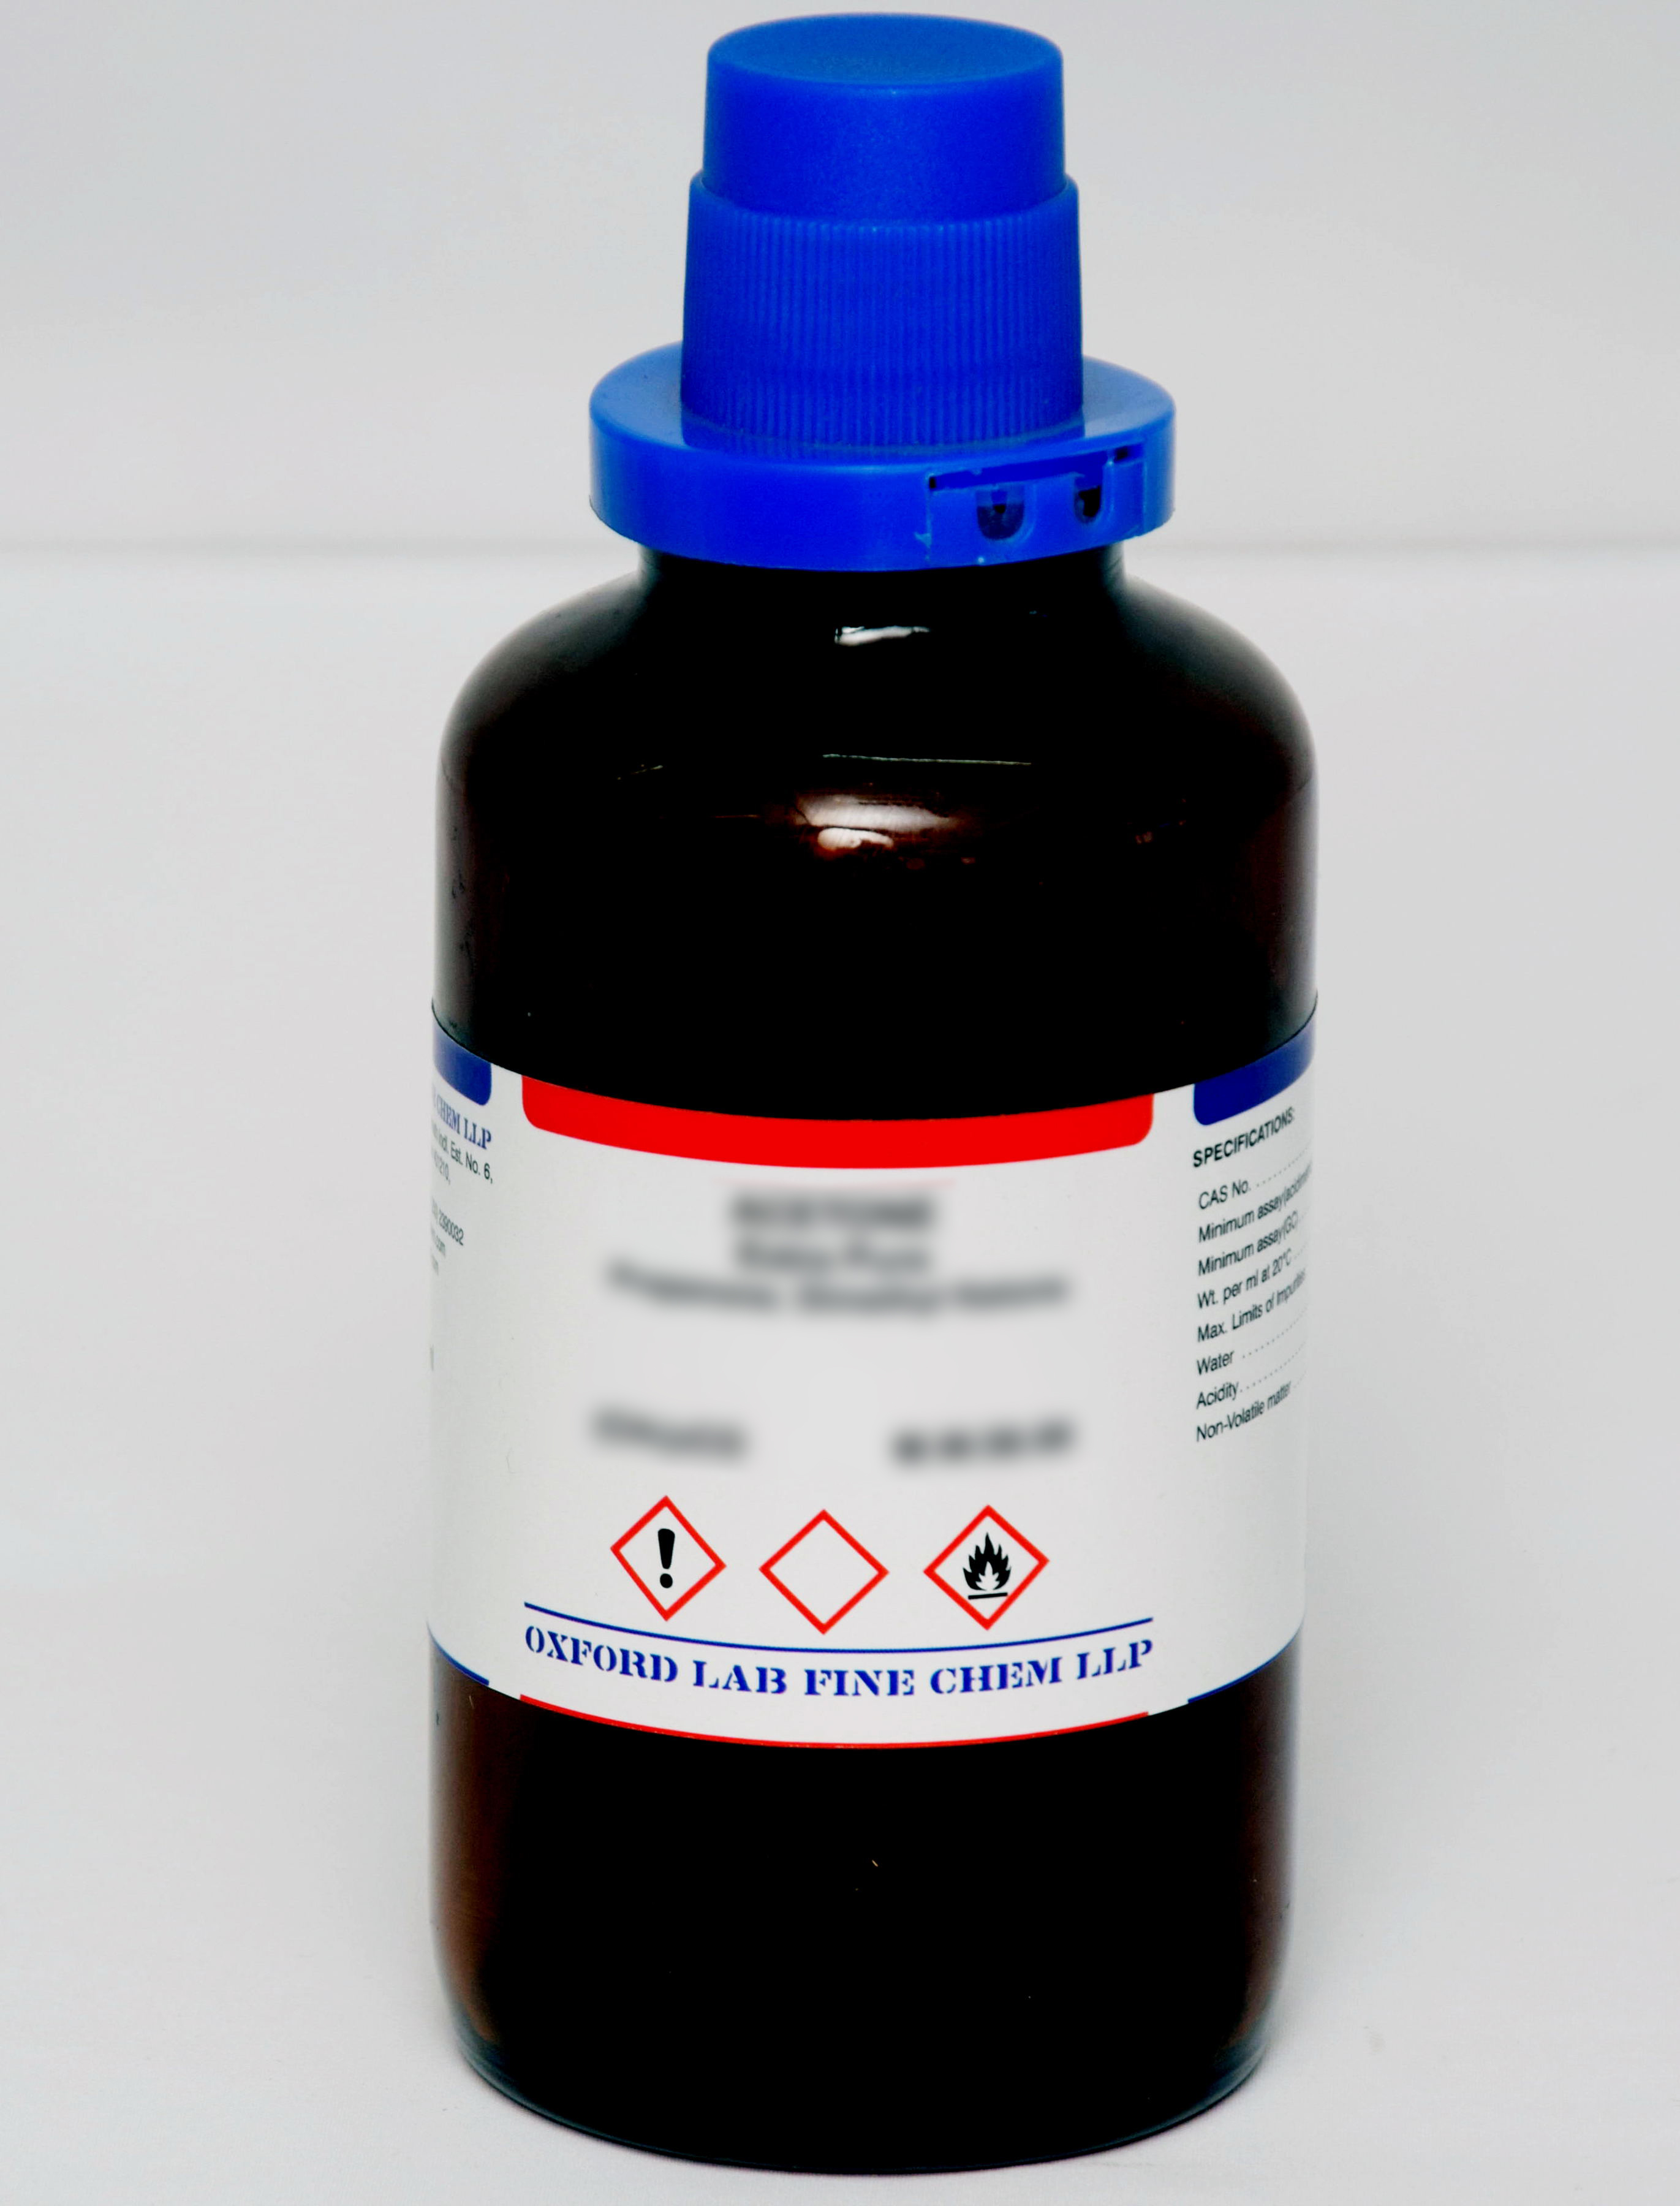 ALUMINIUM AAS STANDARD SOLUTION (1000 mg/l Al in Diluted HCl)